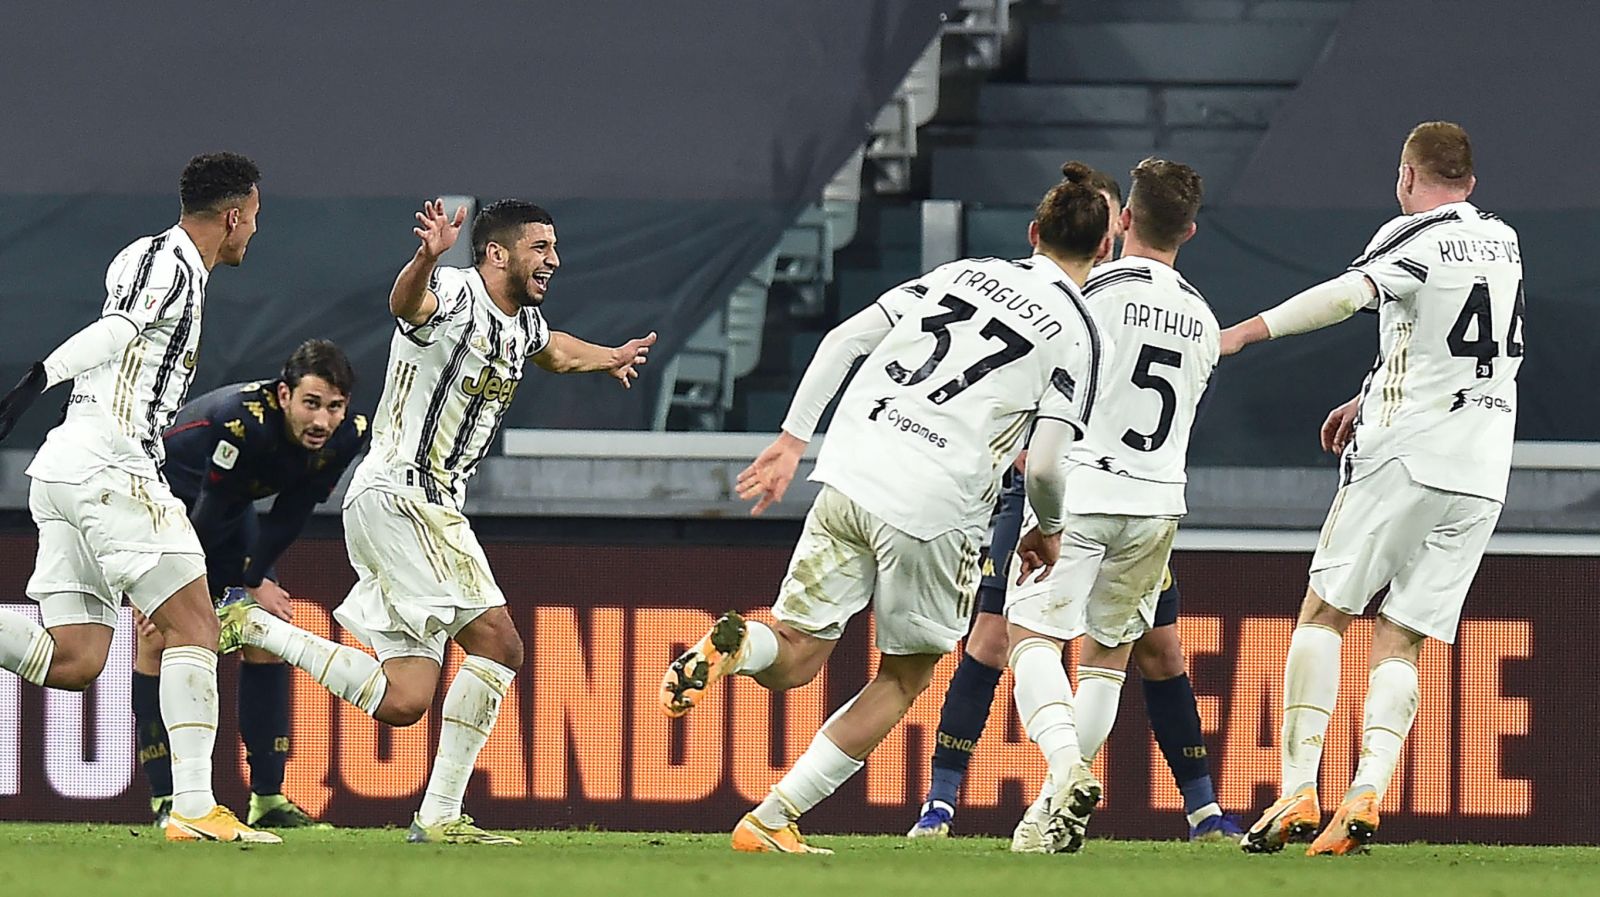 epa08936153 Juventus’ Hamza Rafia (3L) jubilates after scoring  3-2 during the round of 16 of the Italian cup soccer match Juventus FC vs Genoa FC at the Allianz Stadium in Turin, Italy, 13 January 2021.  EPA/ALESSANDRO DI MARCO